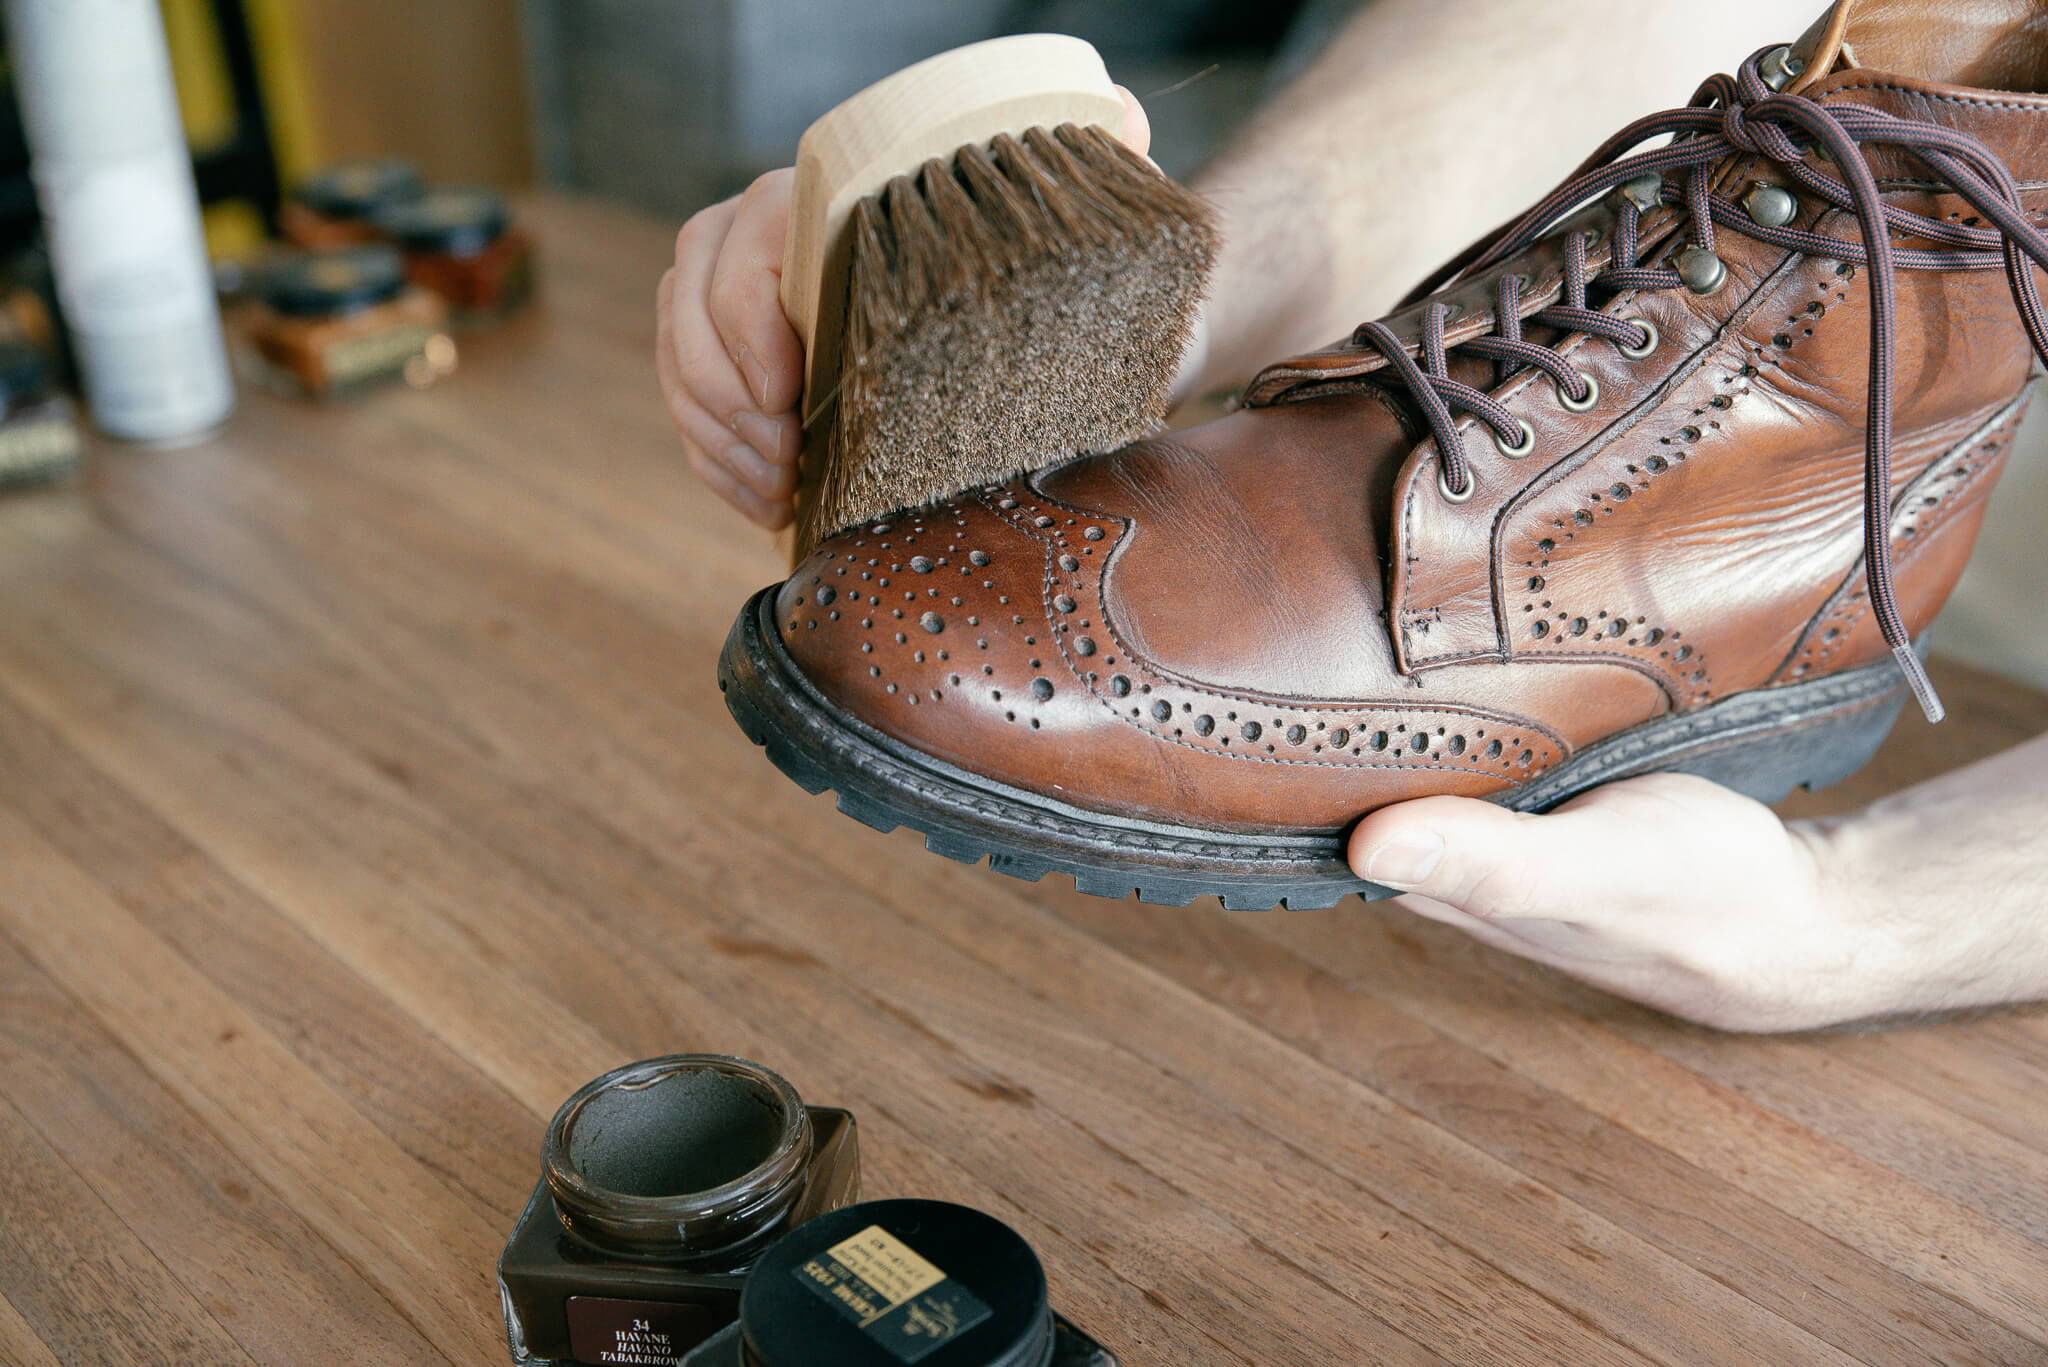 STOP Ruining Your Boots With Saddle Soap  How to Clean and Condition  Leather Boots The Right Way! 